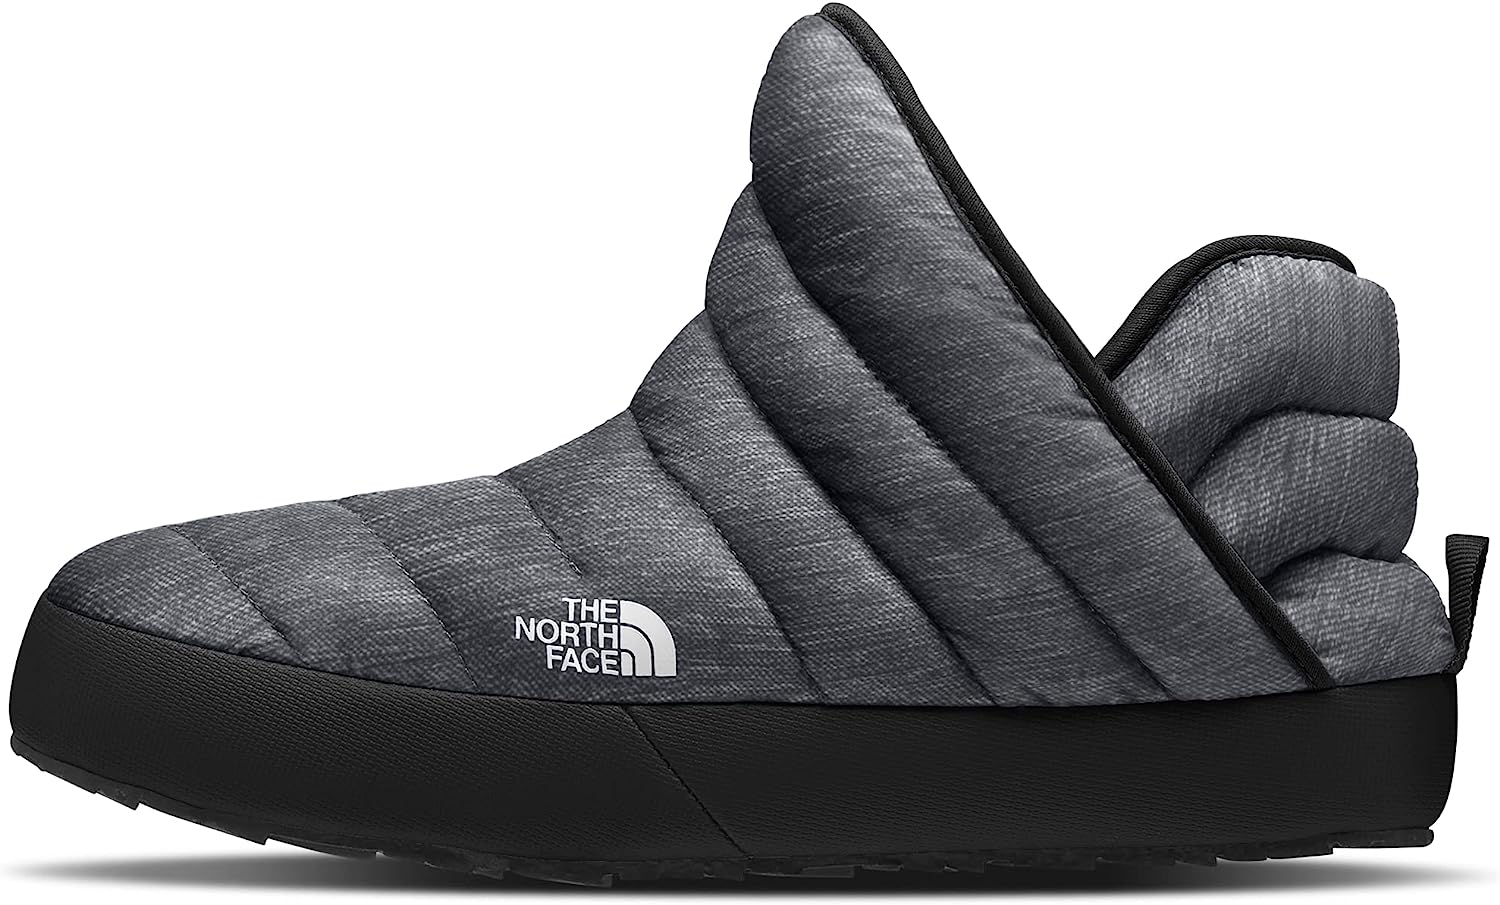 THE NORTH FACE Men's Thermoball Traction Bootie